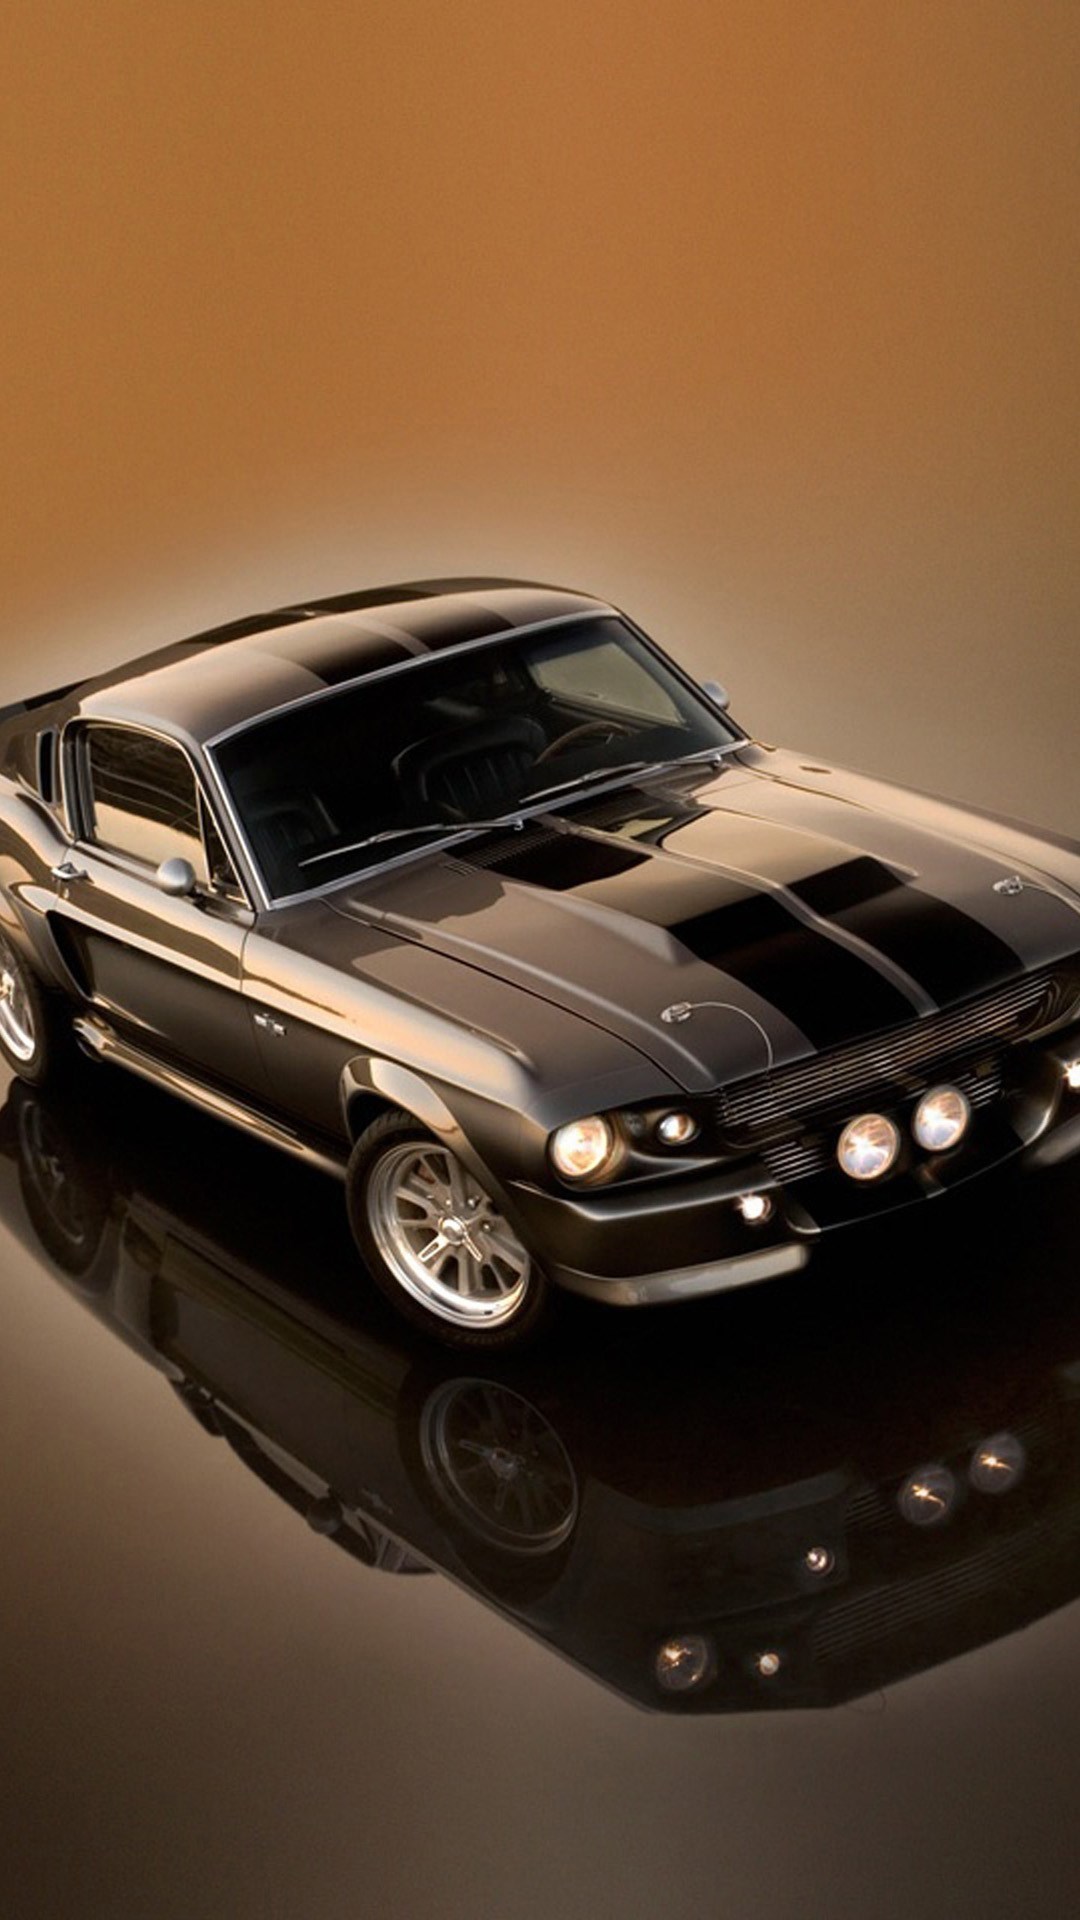 Mustang Iphone Wallpaper 76 Images Ford Shelby Gt500 - 1967 Mustang Shelby Gt500 Eleanor Gone In 60 Seconds , HD Wallpaper & Backgrounds